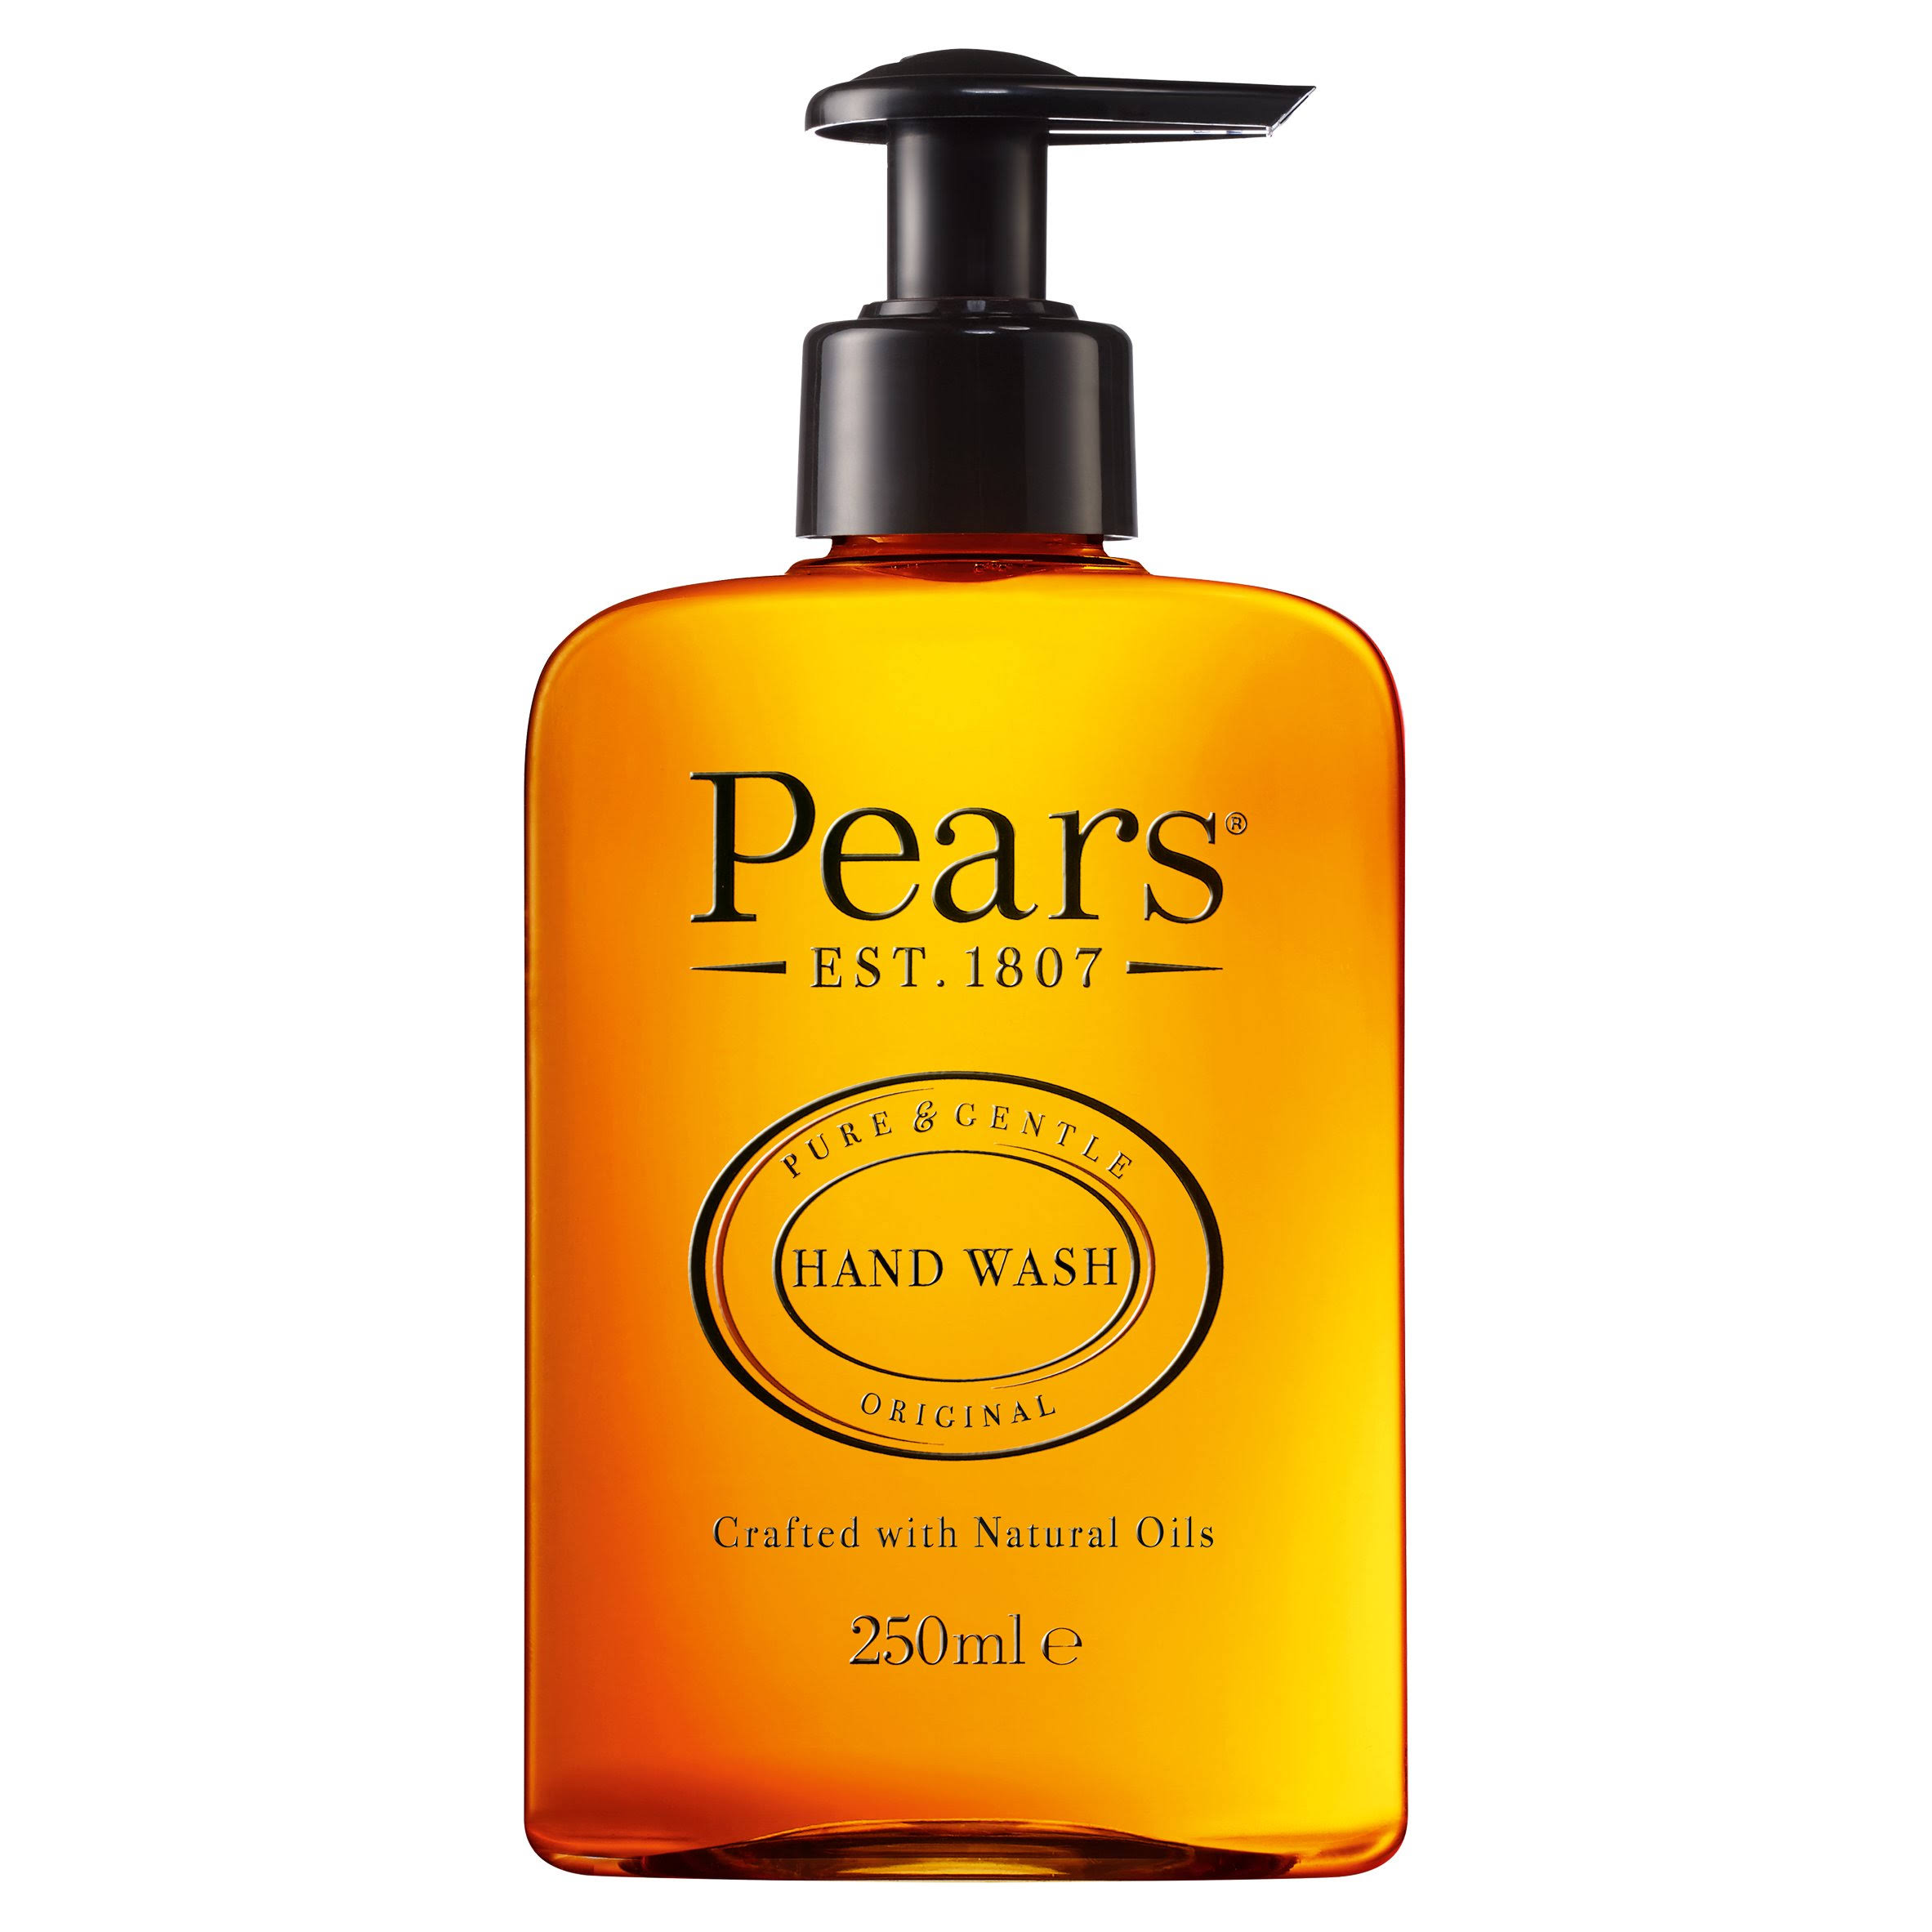 Pears Liquid Hand Wash - with Natural Oils, 250ml